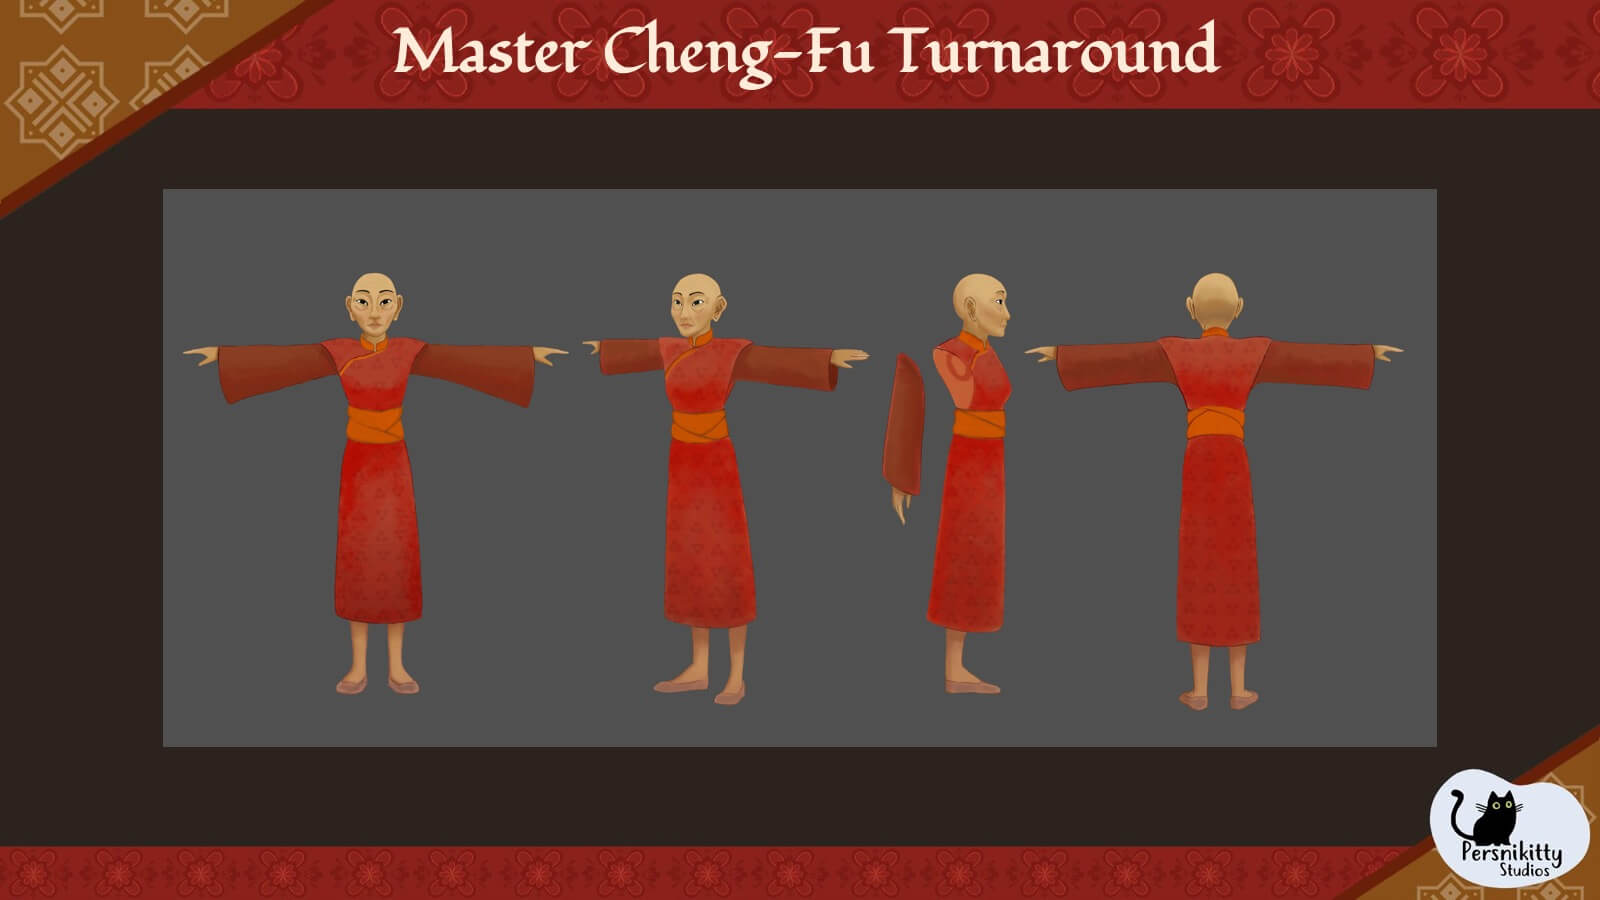 A slide with a turnaround of the character model for Master Cheng-Fu.